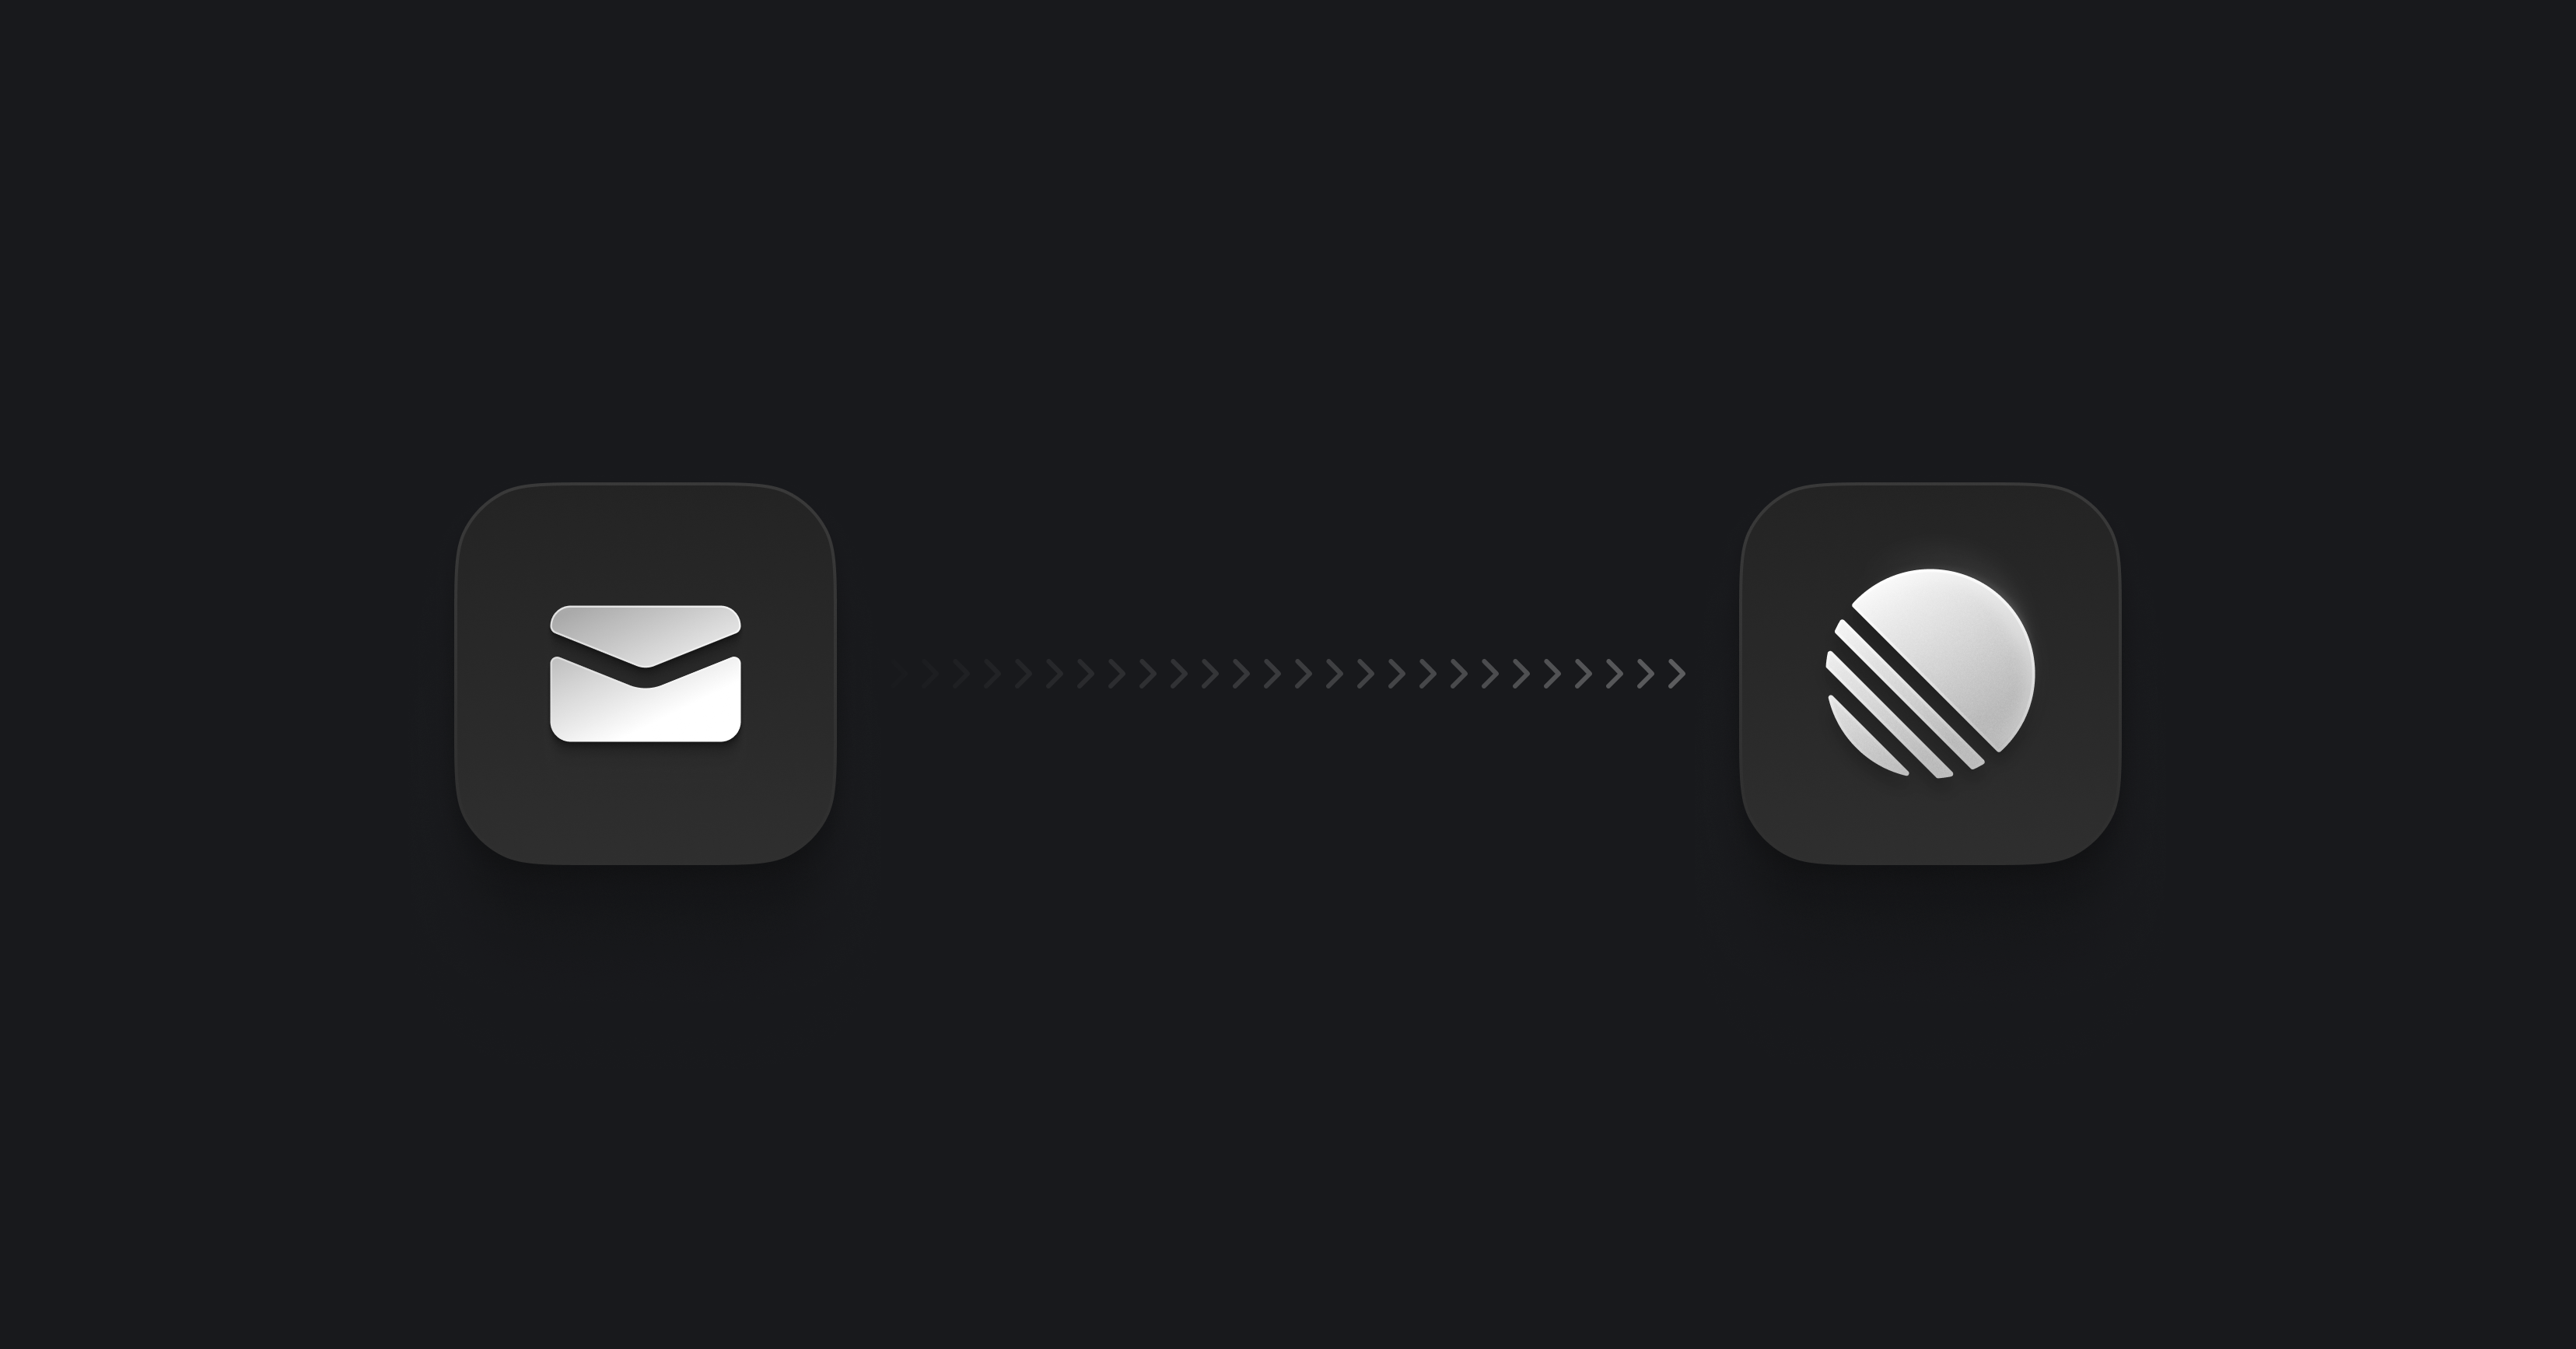 Icon with email symbol showing arrows pointing toward Linear icon